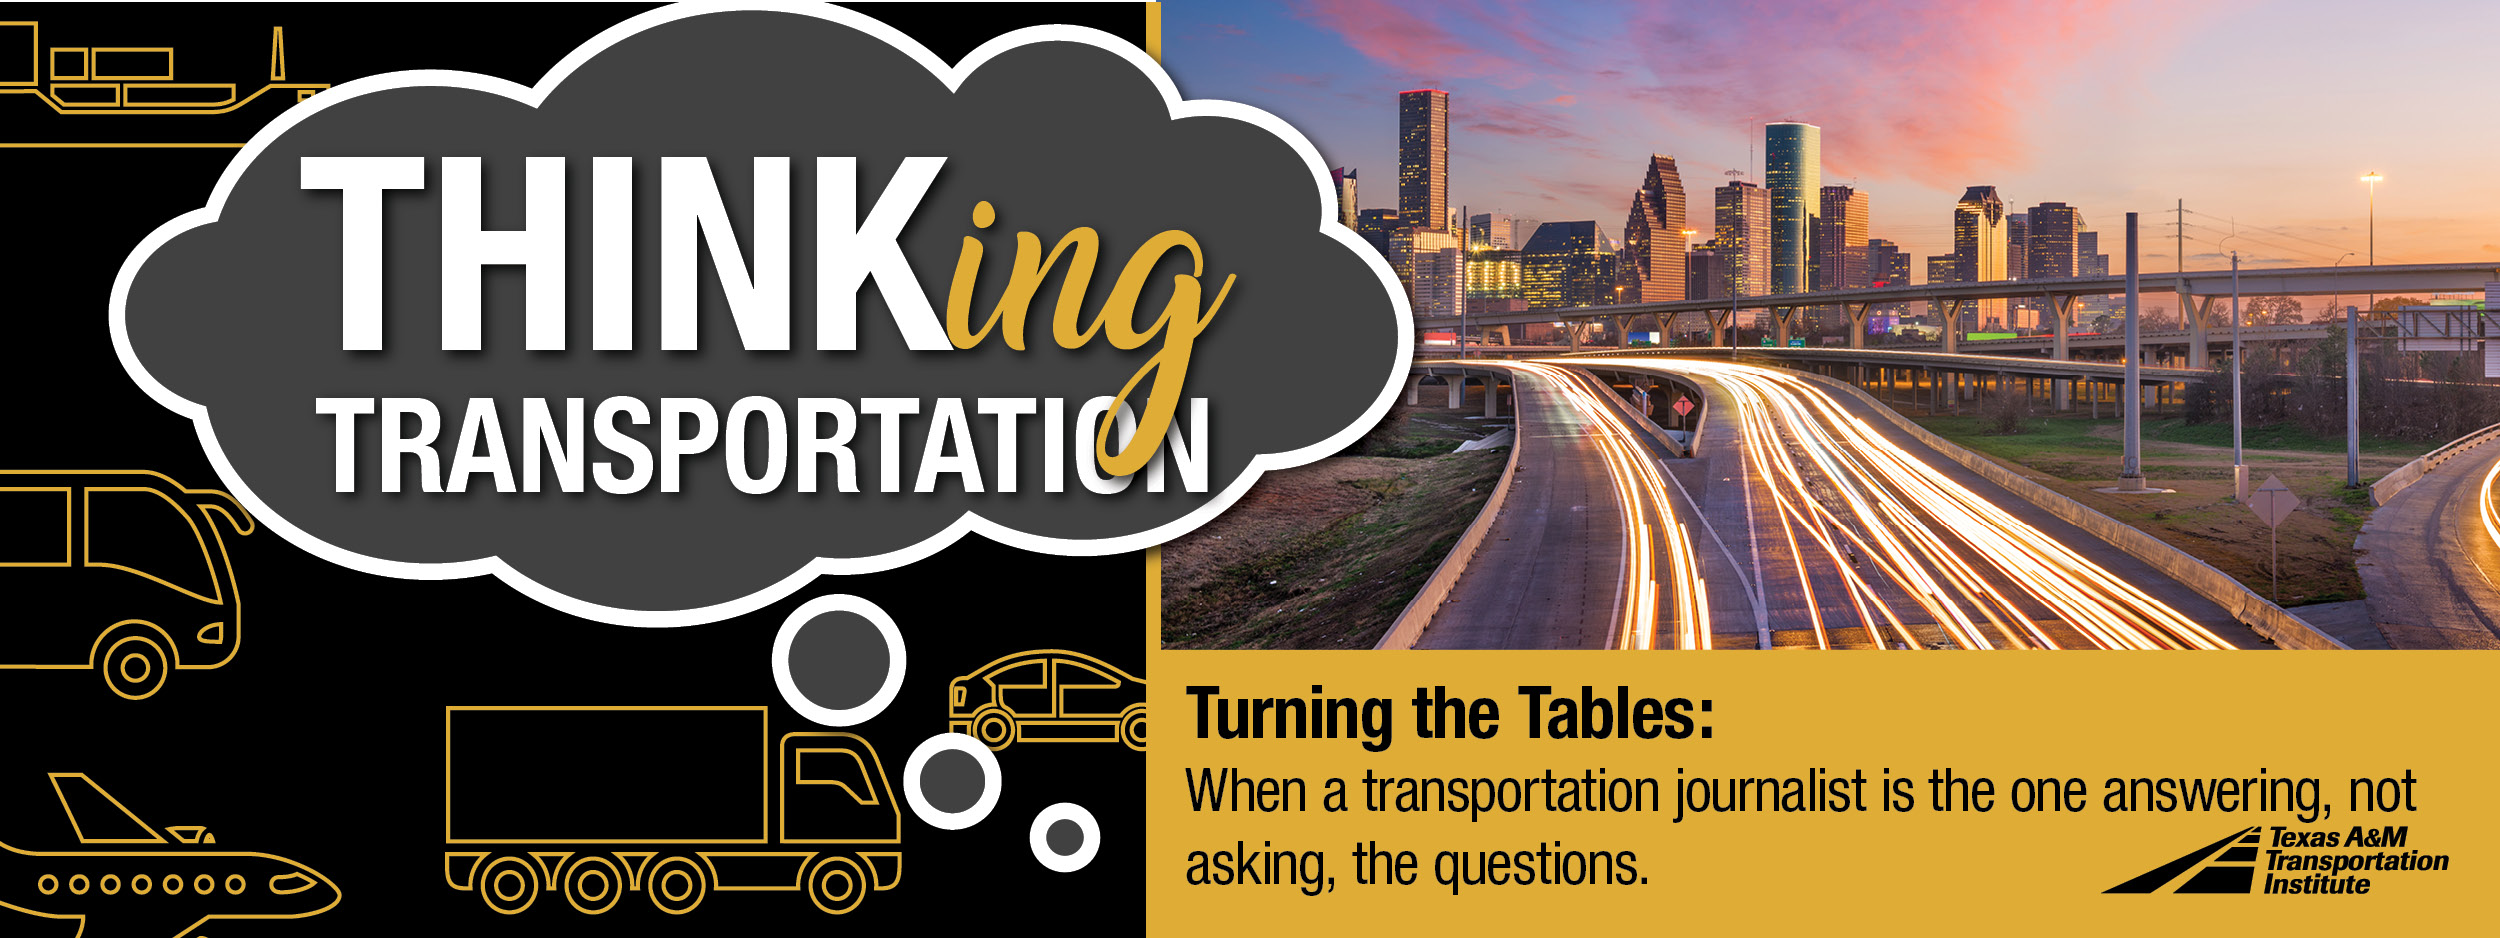 Turning the Tables: When a transportation journalist is the one answering, no asking, the questions.